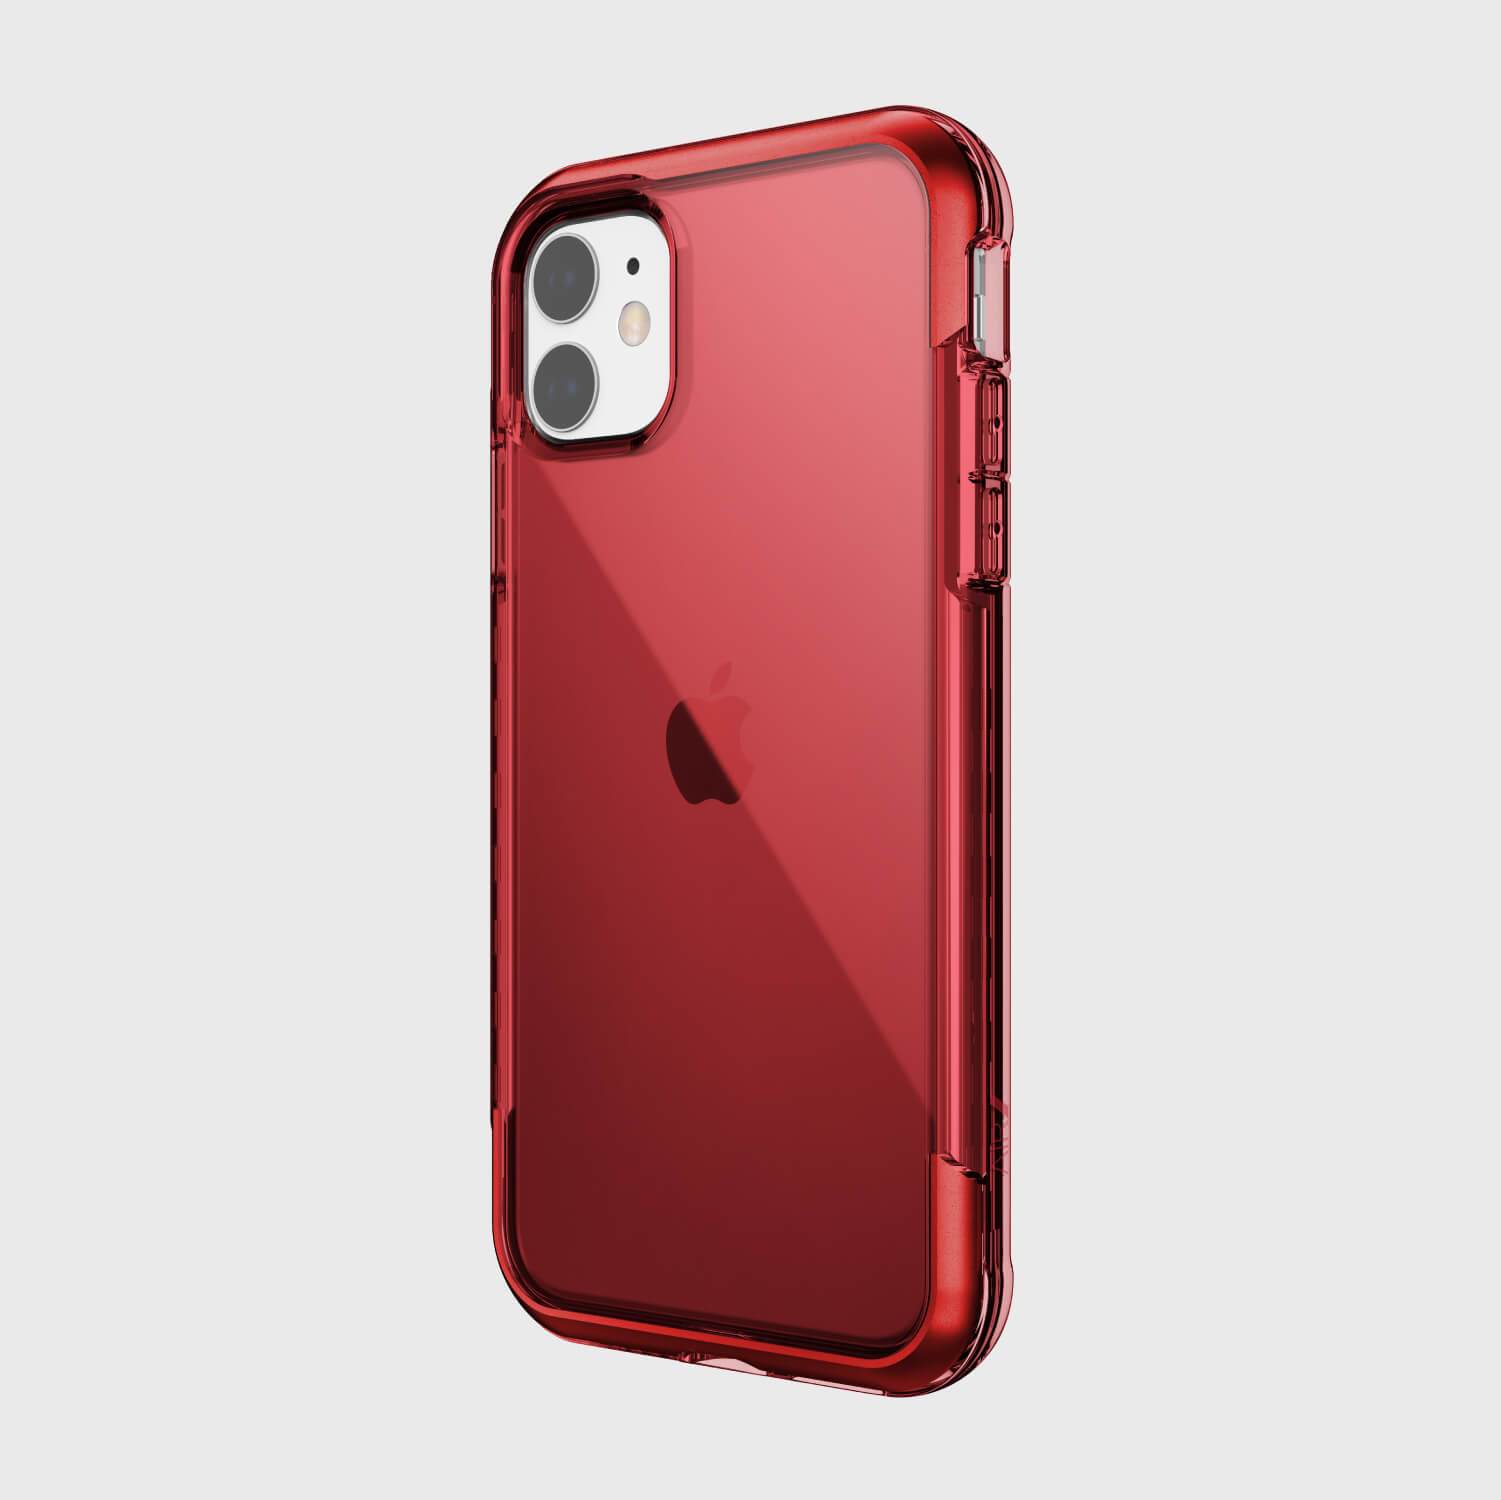 A Raptic Air iPhone 11 Pro Max Case with 13 foot drop protection on a white background.